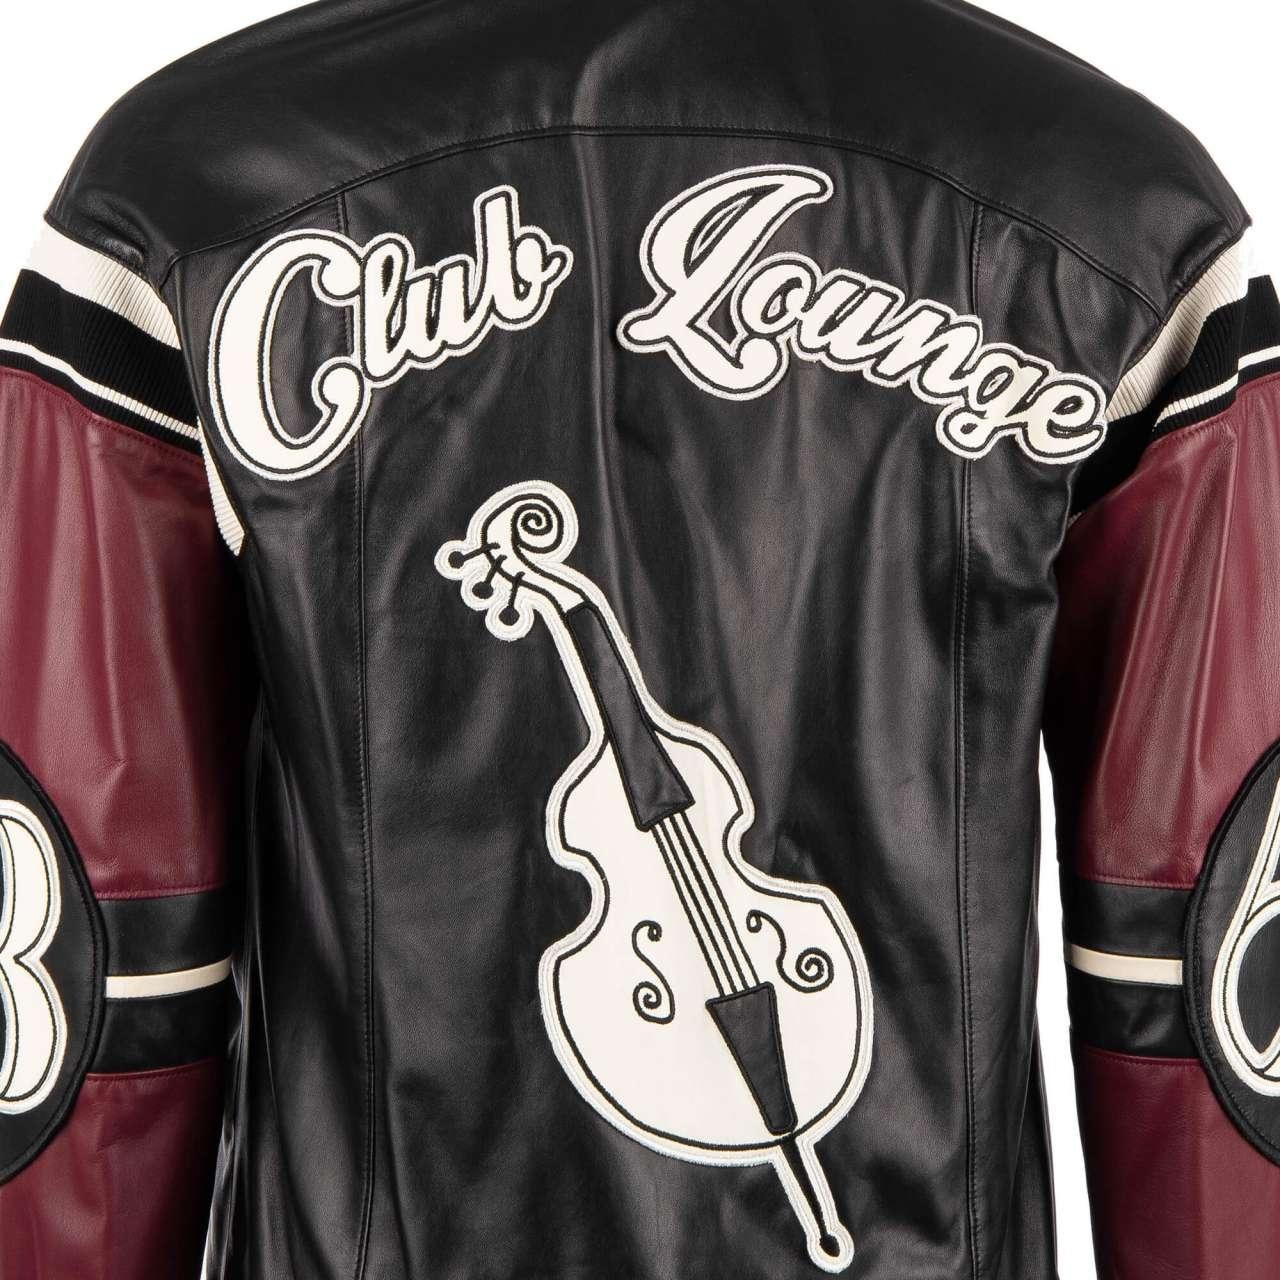 D&G Club Lounge Cello Embroidered Bomber Leather Jacket Black Bordeaux 52 For Sale 2